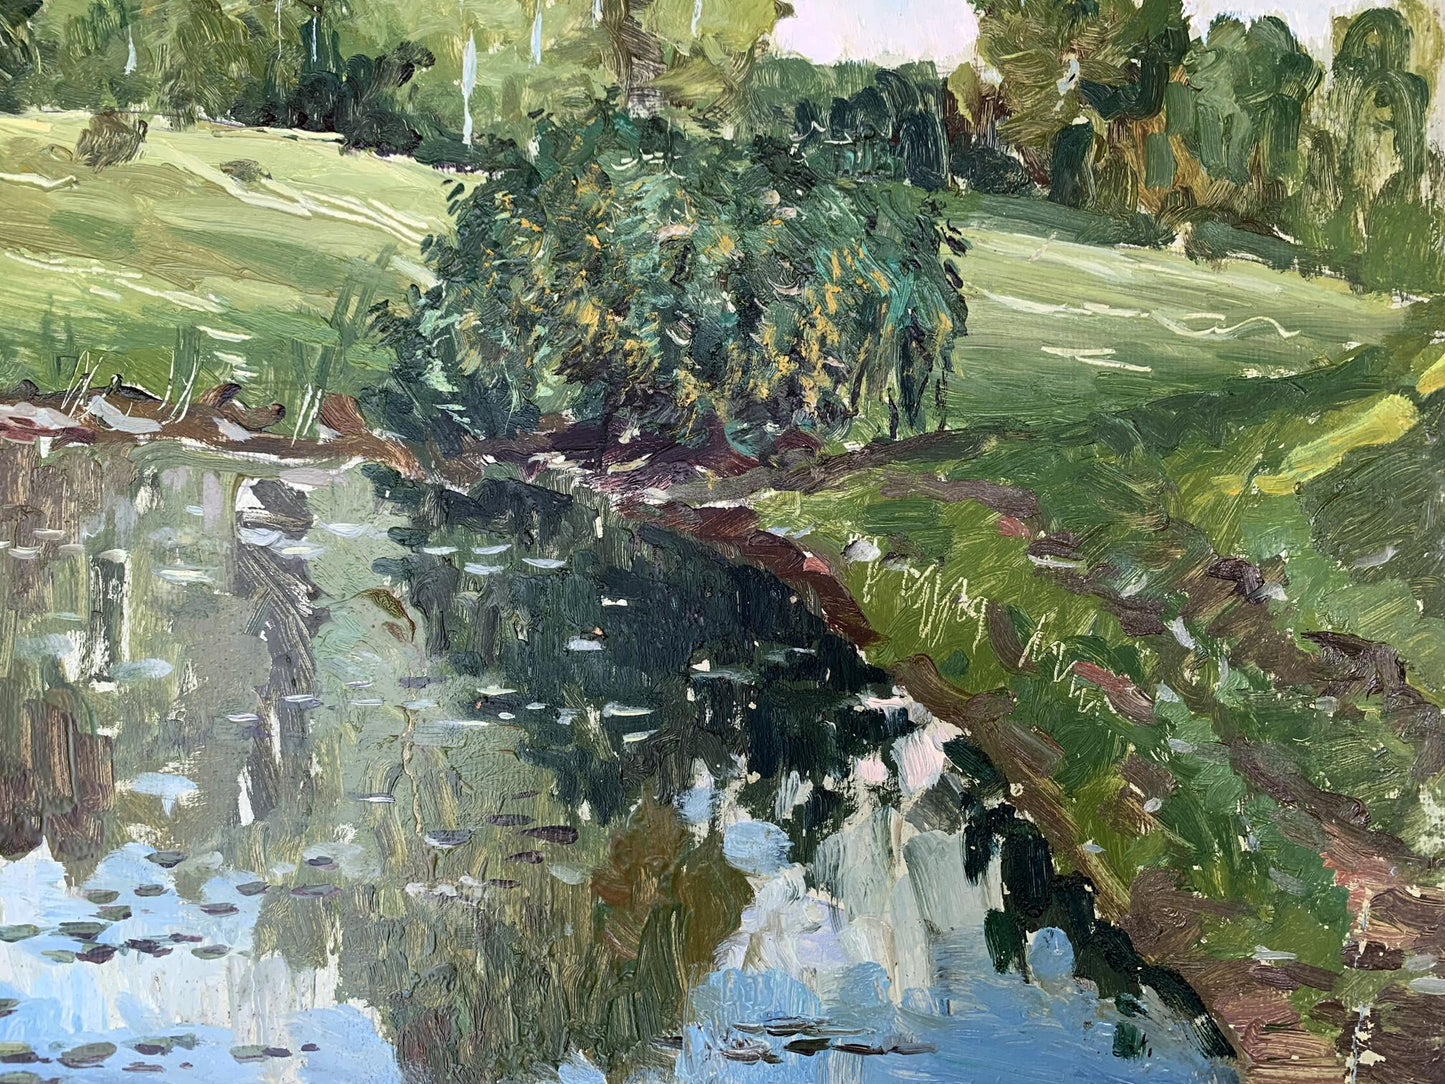 The beauty of a secluded lake surrounded by woodland, portrayed in oil by A. G. Cherkas